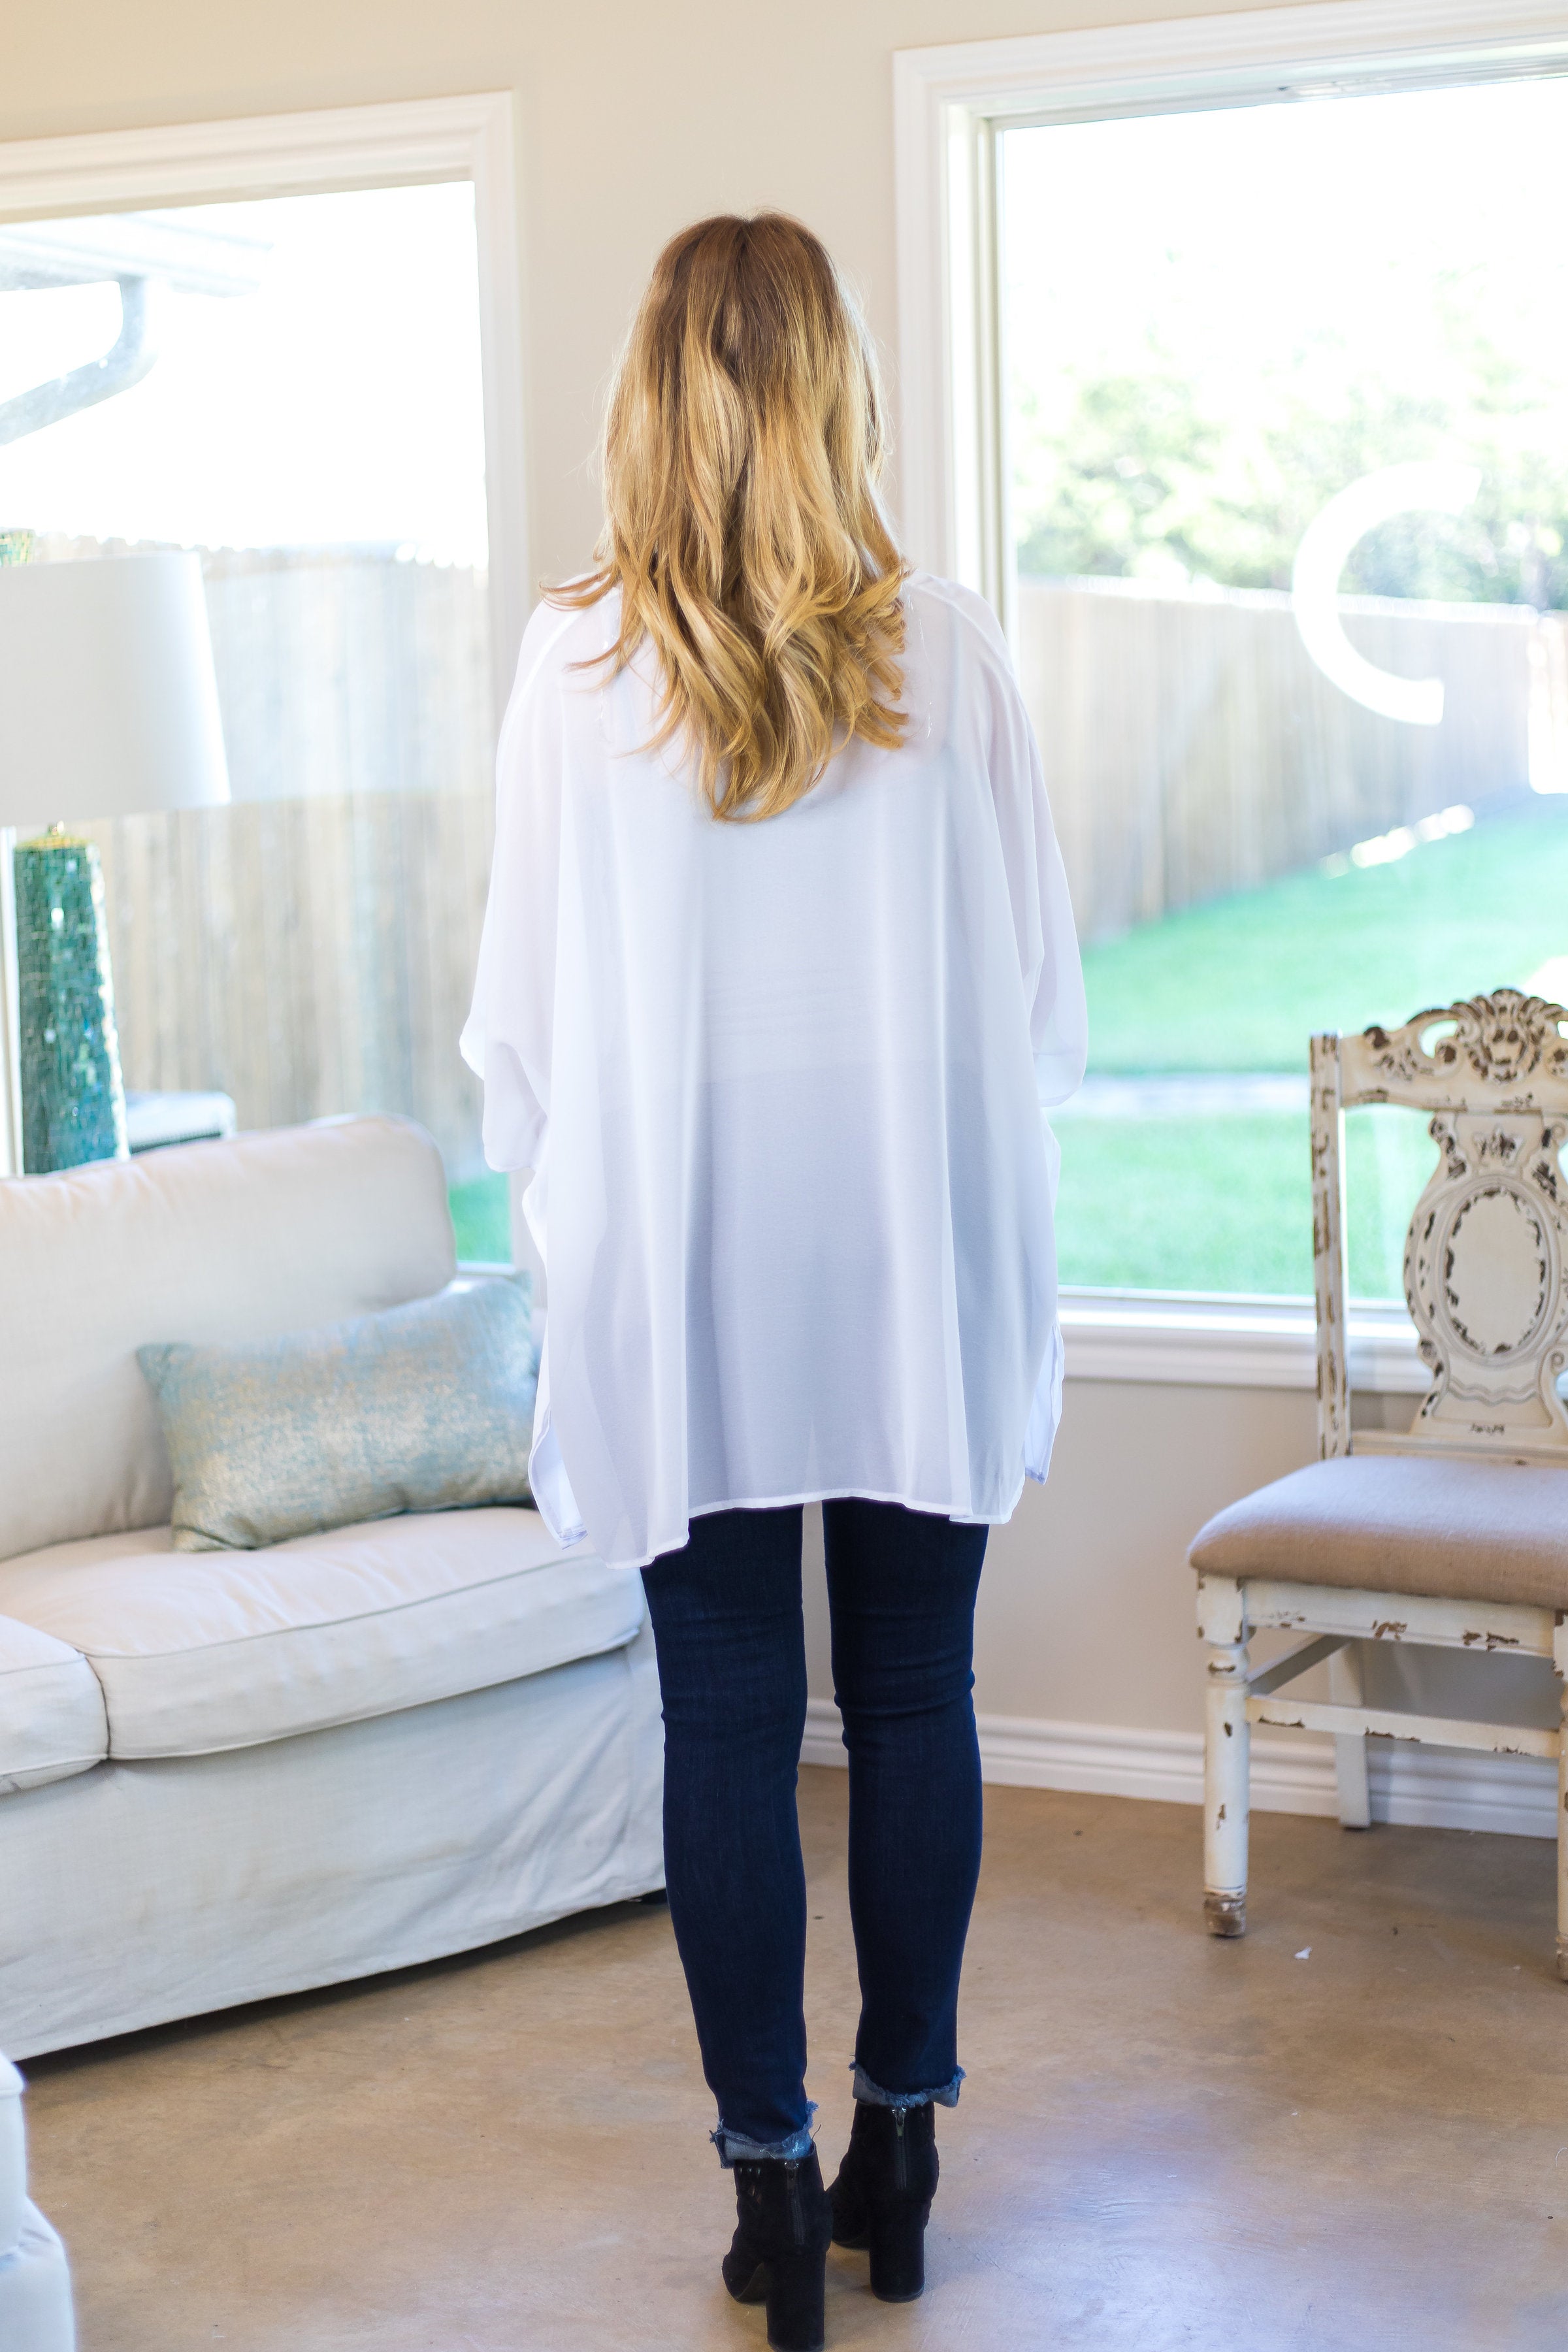 Last Chance Size Large | Sure Thing Sheer Oversized Poncho Top in White - Giddy Up Glamour Boutique